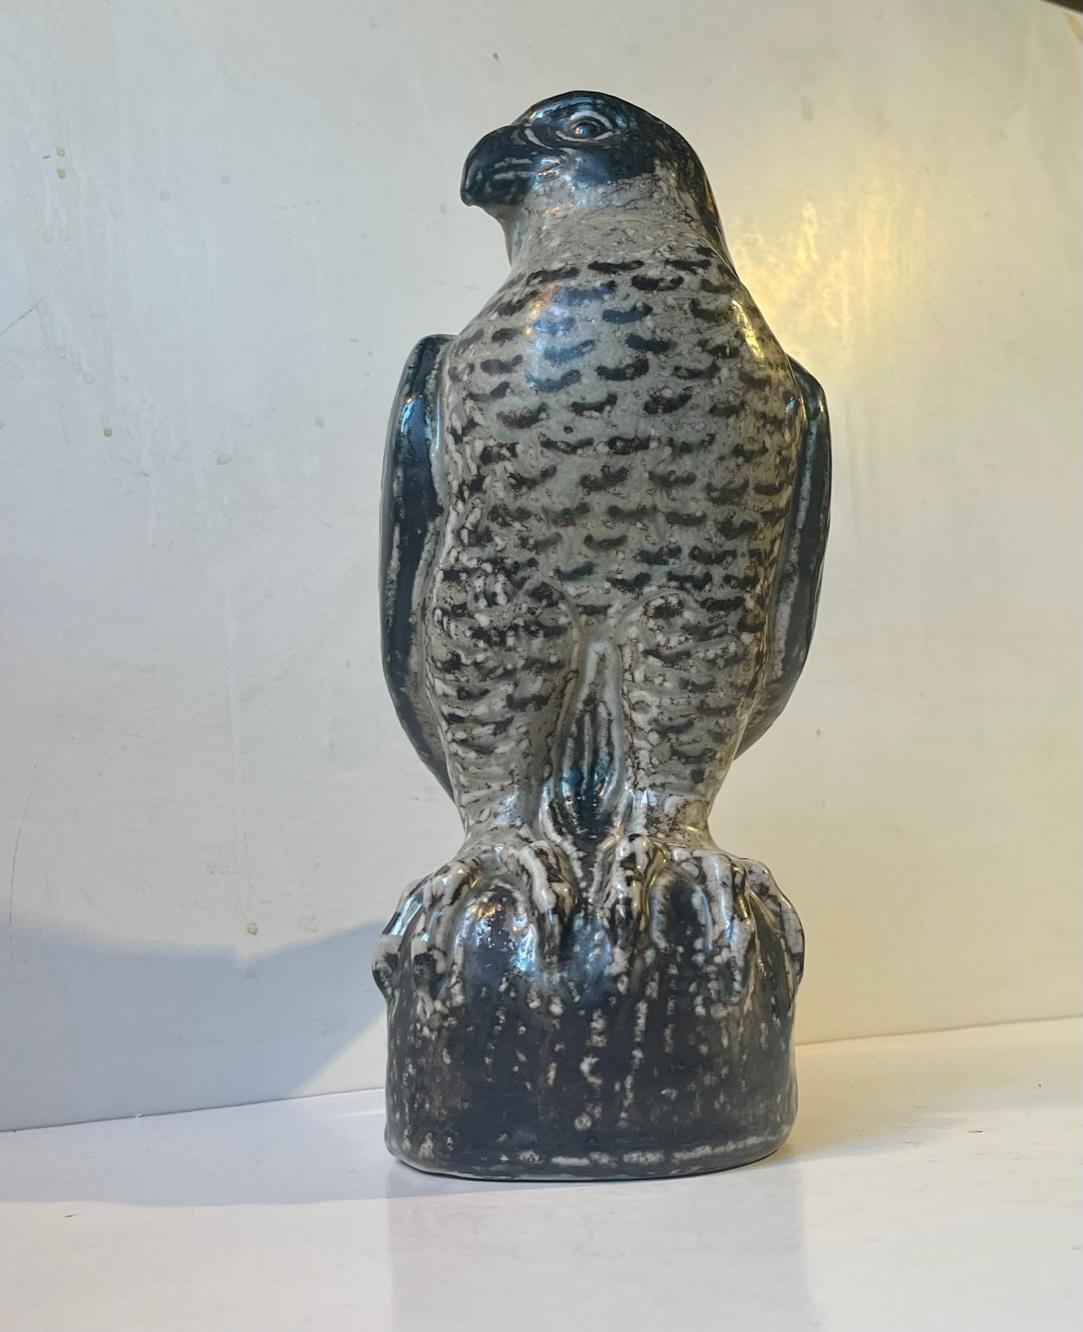 Large glazed stoneware Falcon designed by the Danish ceramist Knud Kyhn (KK) all the way back in 1940-50. Hugely inspired by the sung glazes applied in Axel Salto's and Bode Willumsen's designs these naturalistic figurines were very popular. This